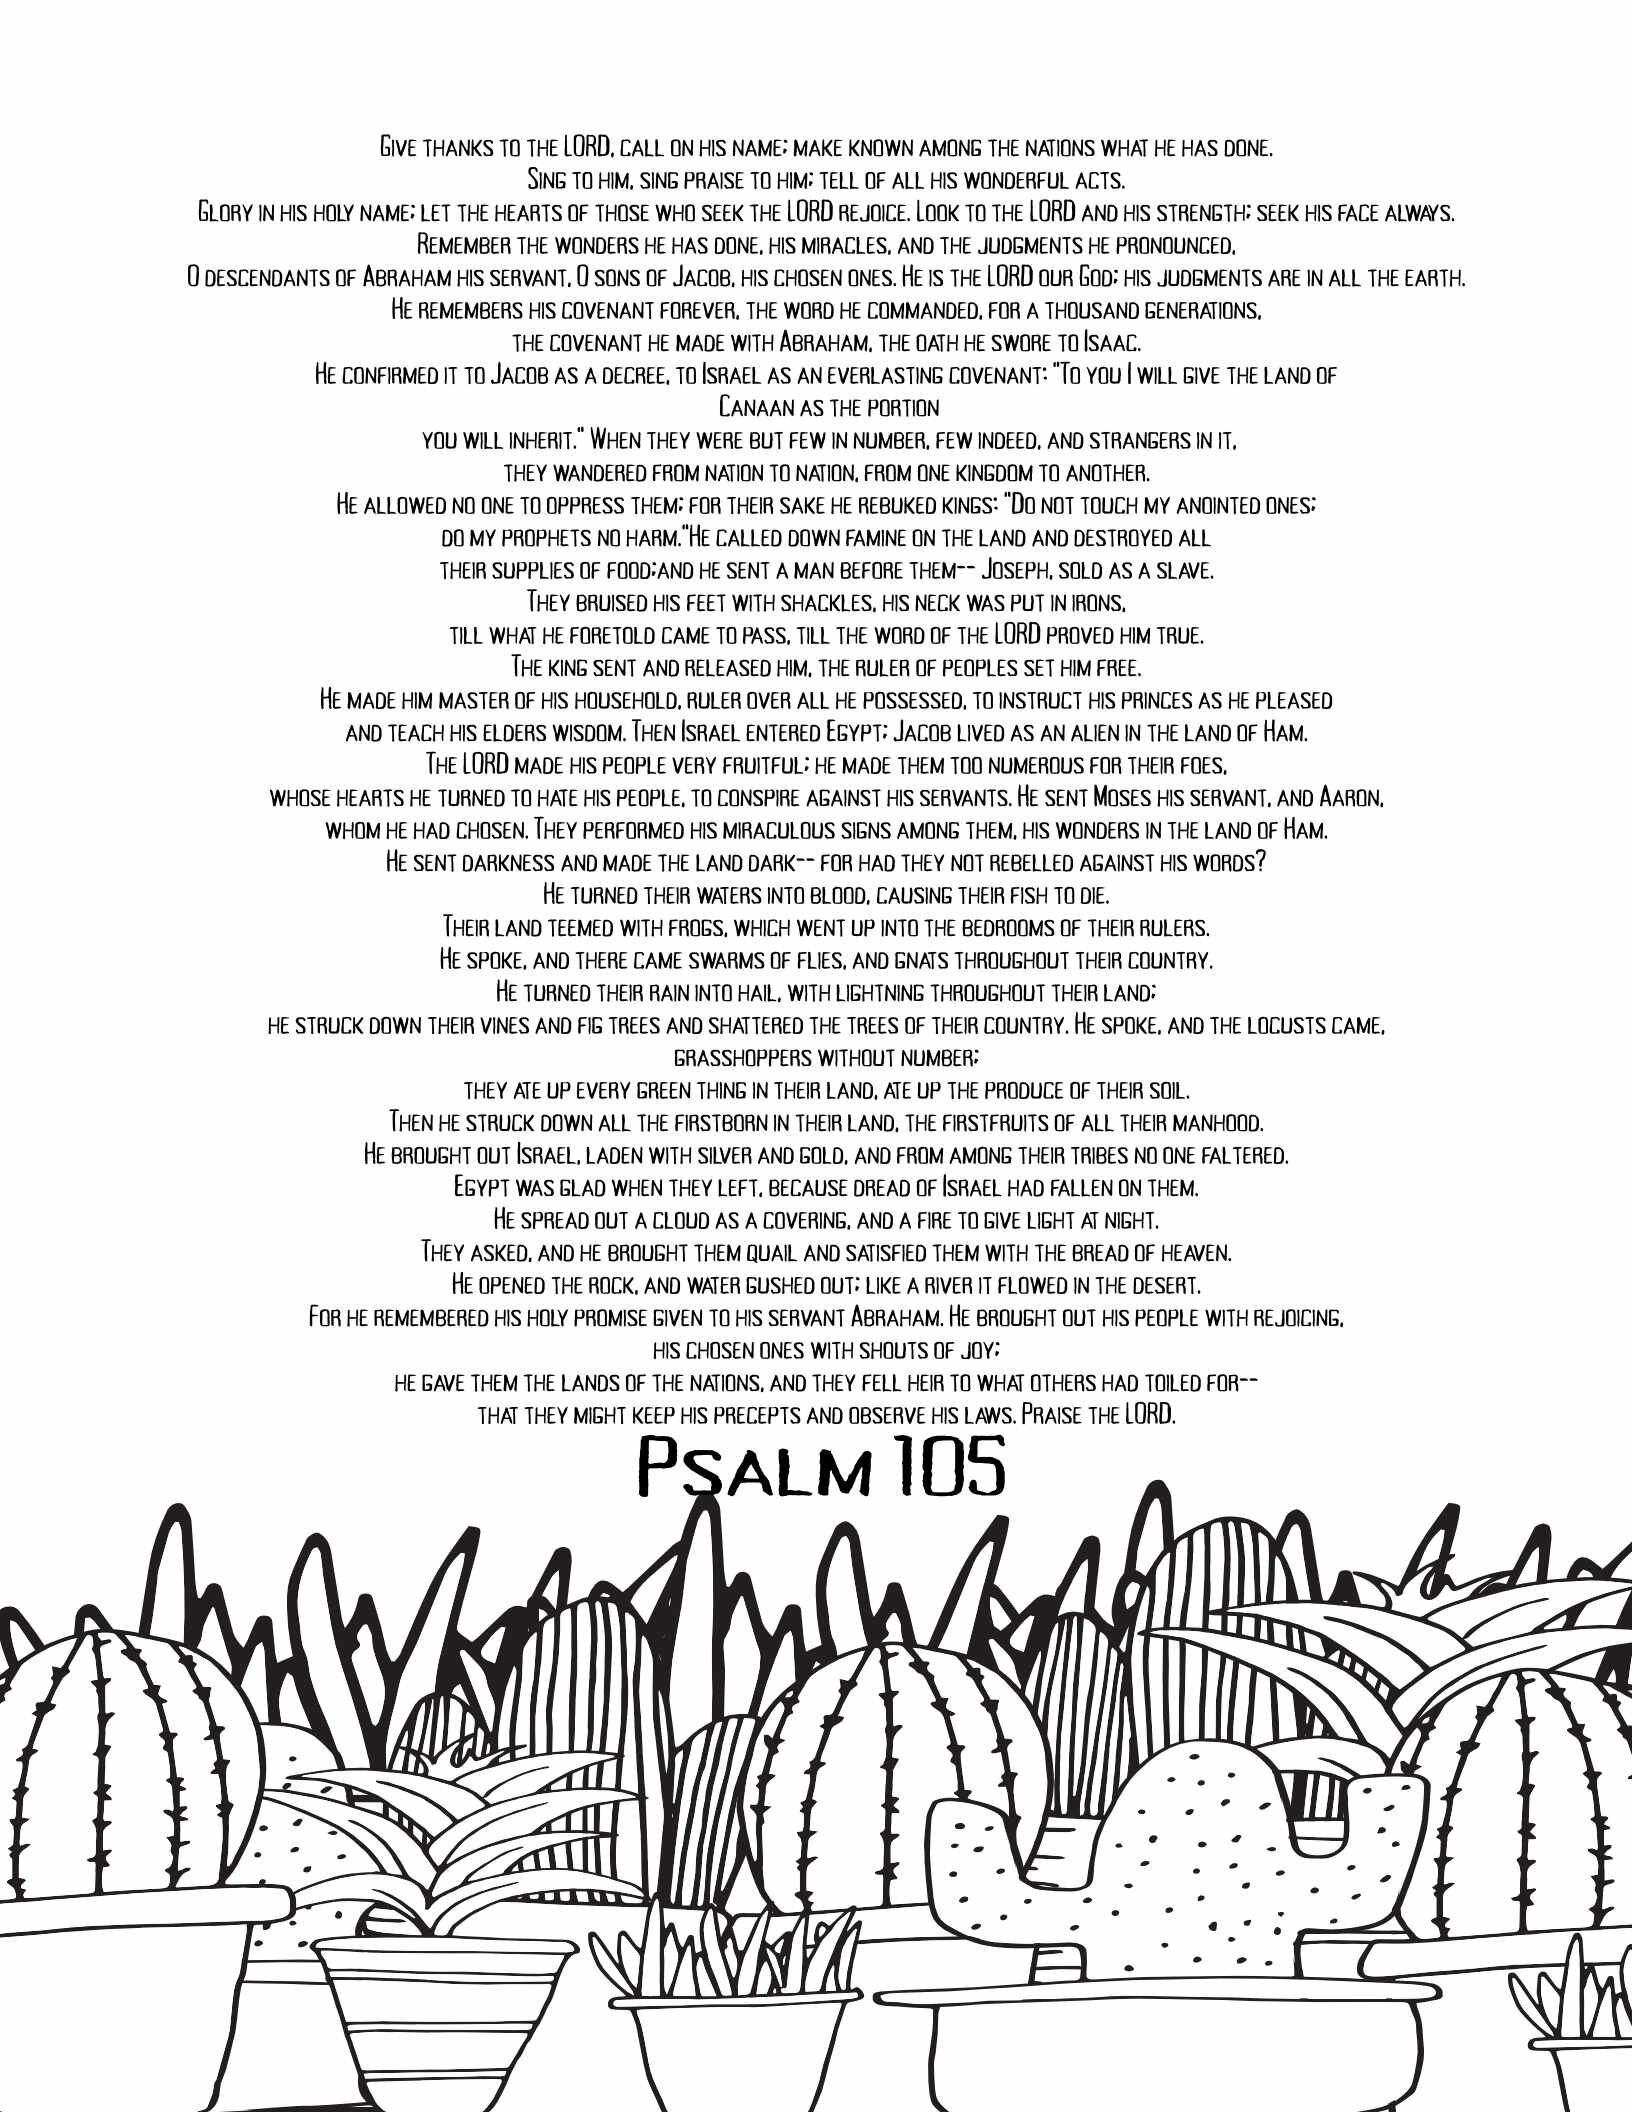 10 Free Printable Psalm Coloring Pages - Download and Color Adult Scripture - Psalm 105CLICK HERE TO DOWNLOAD THIS PAGE FREE